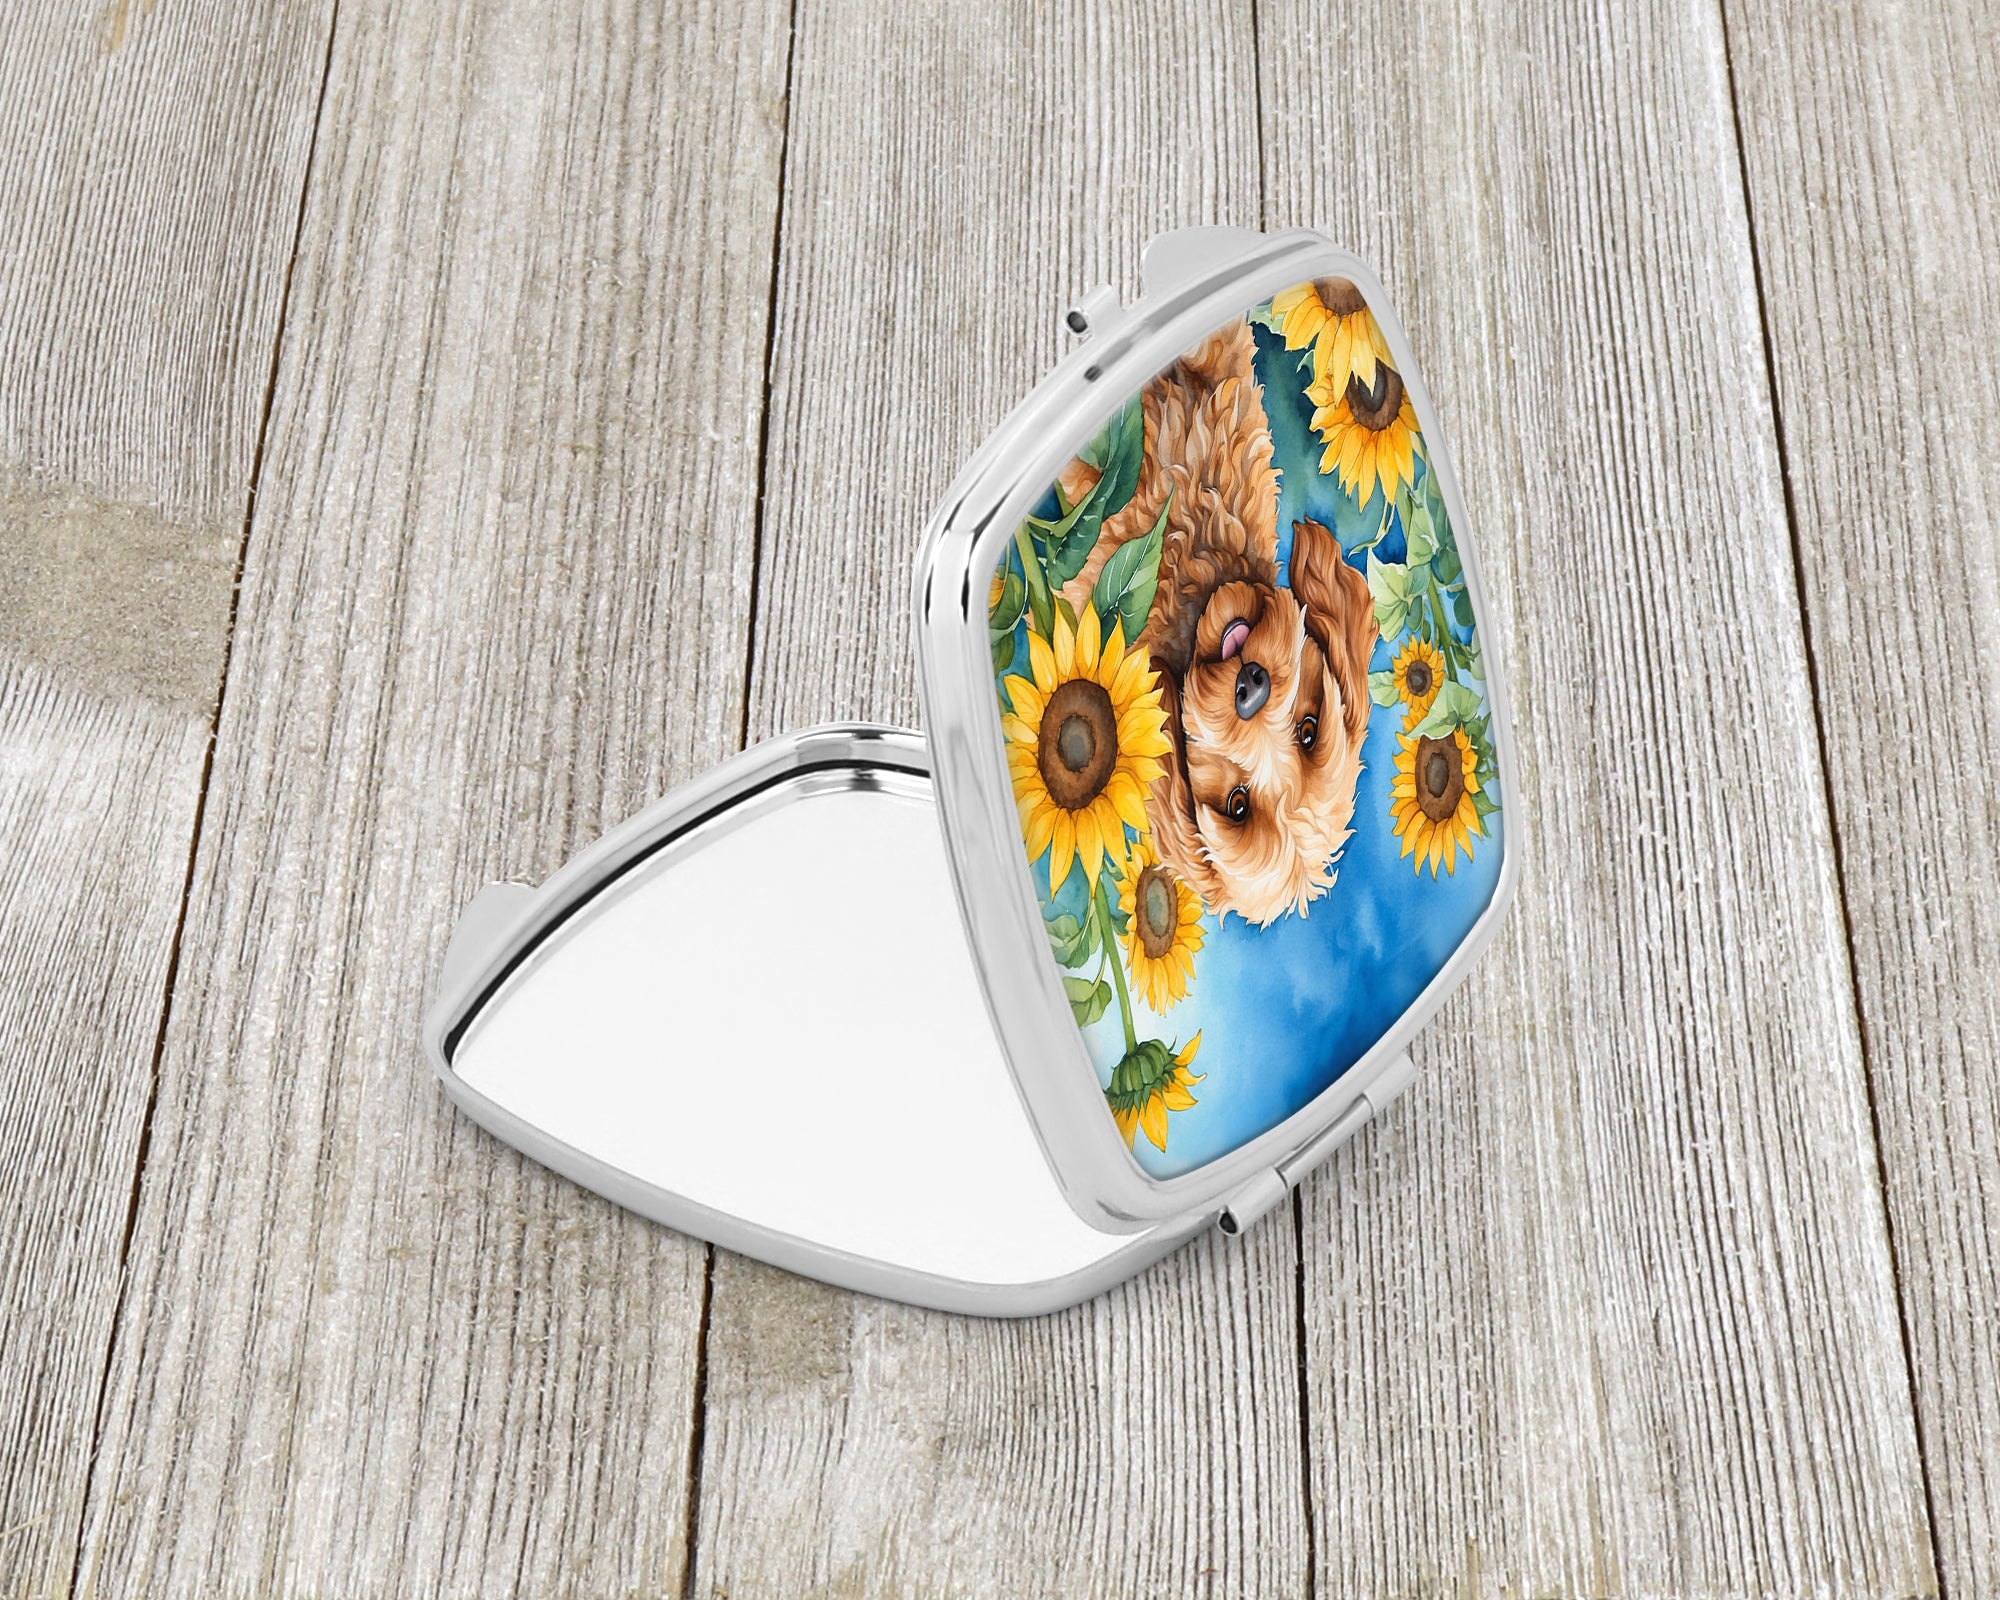 Cockapoo in Sunflowers Compact Mirror